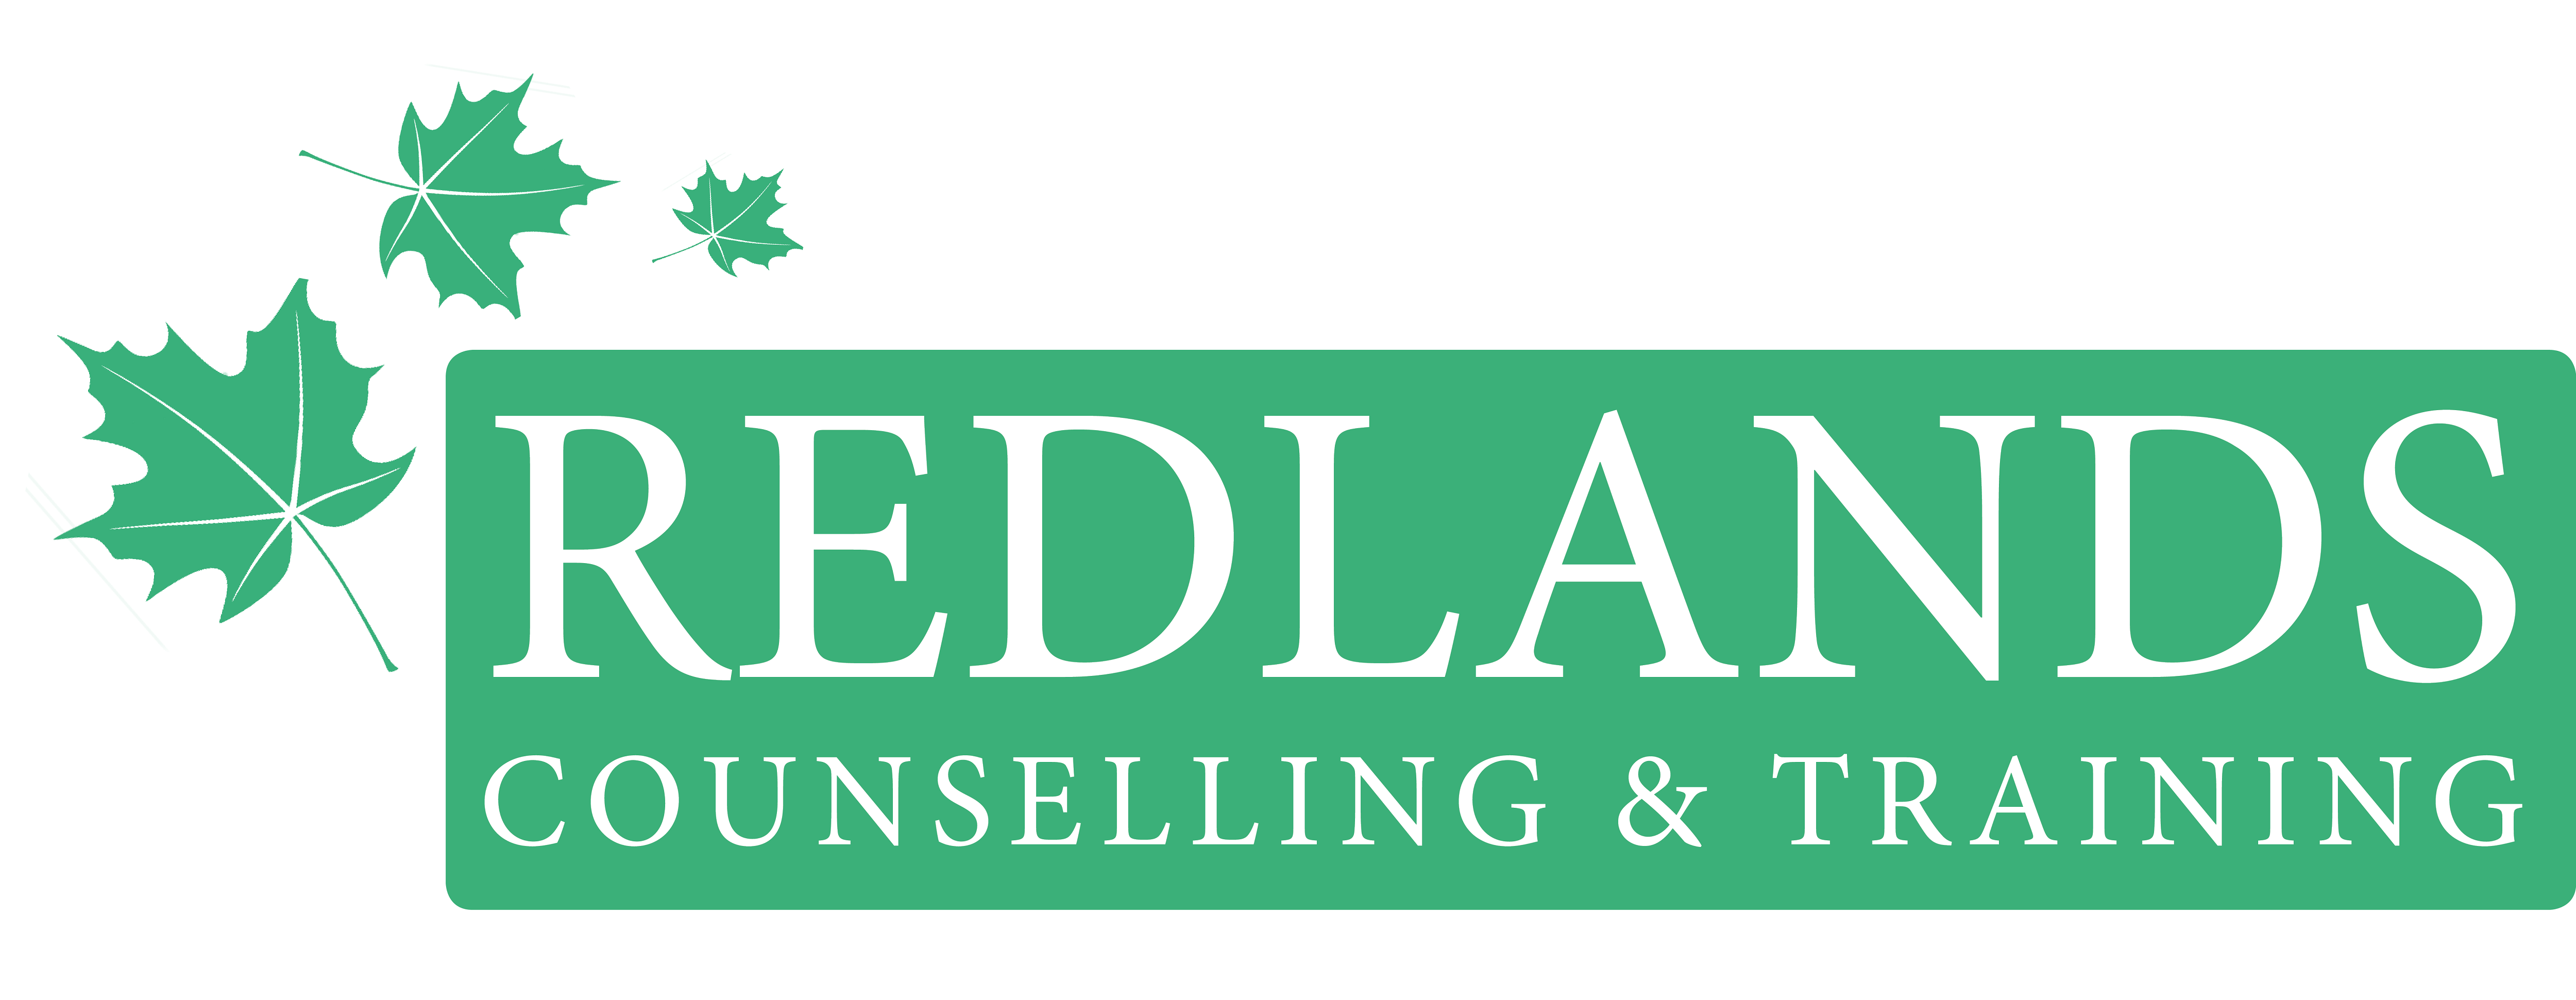 CPCAB Logo - Homepage - Redlands Counselling and Training